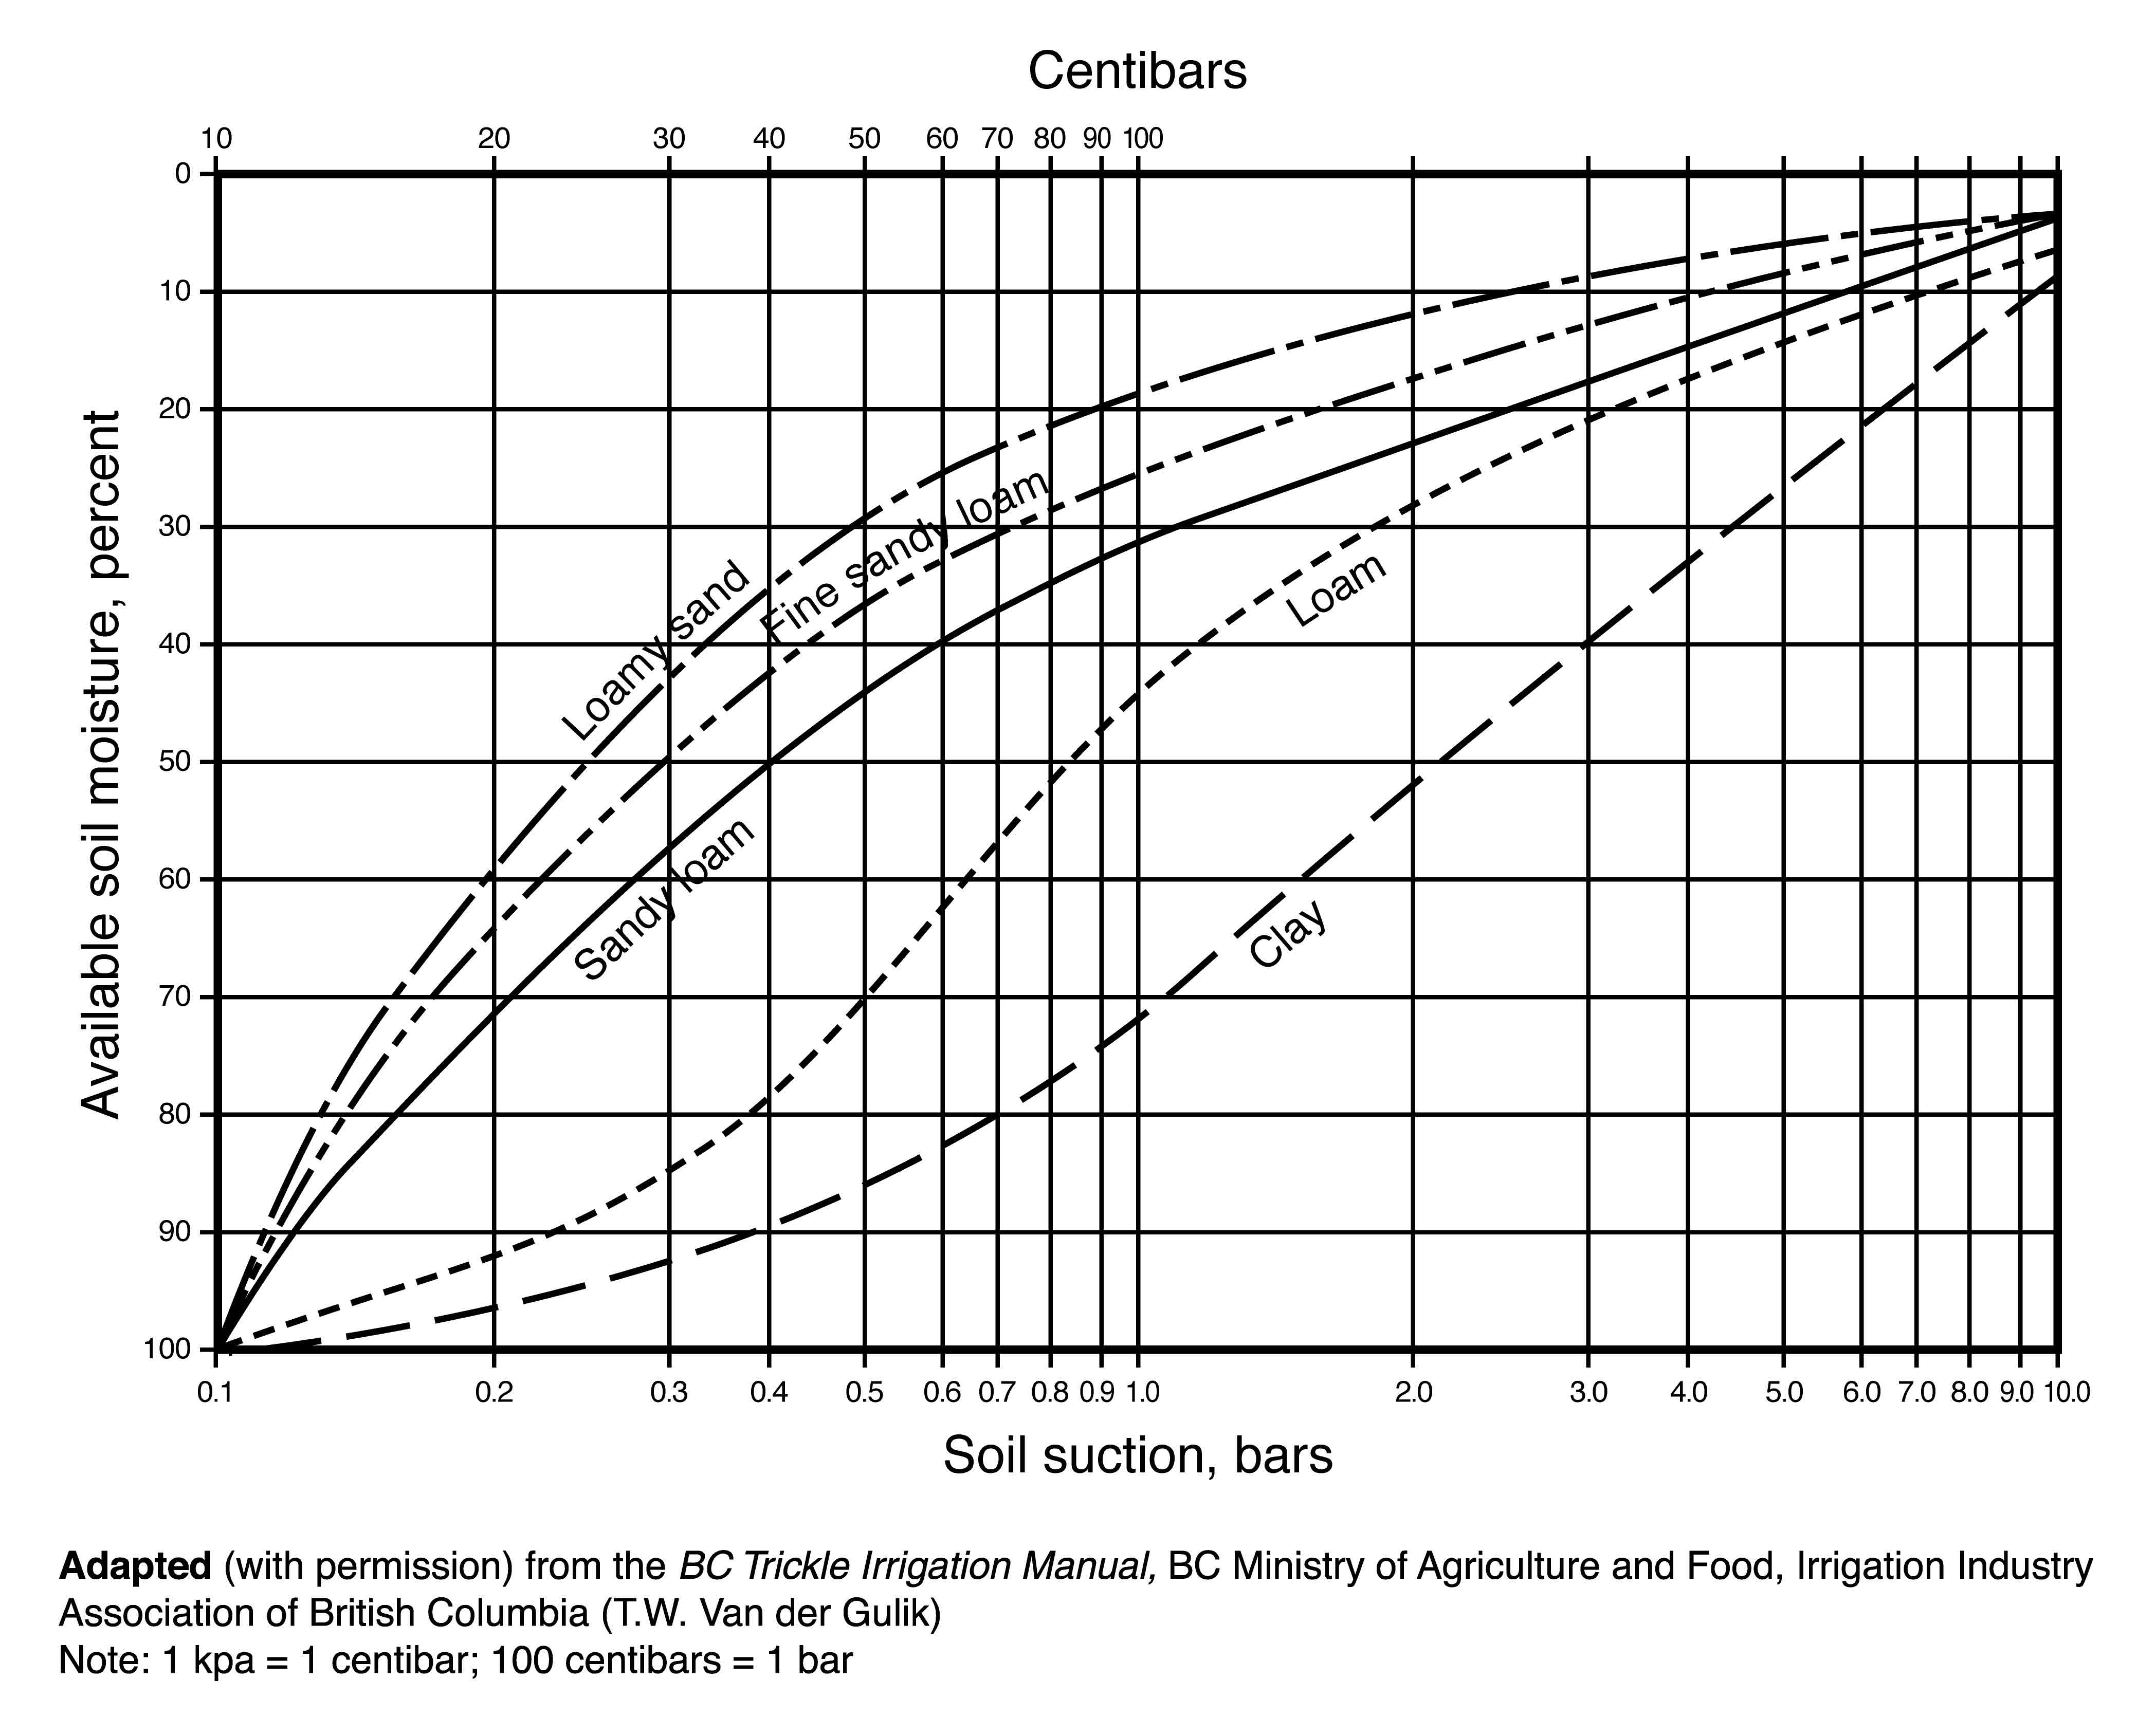 This graph converts soil moisture tension readings to % available soil moisture for various soil textures. Soil moisture tension is measured by a Tensiometer or Electrical Resistance block and is usually expressed in bars, centibars or kilopascals. One kilopascal is equal to 1 centibar; 100 centibars equals one bar.